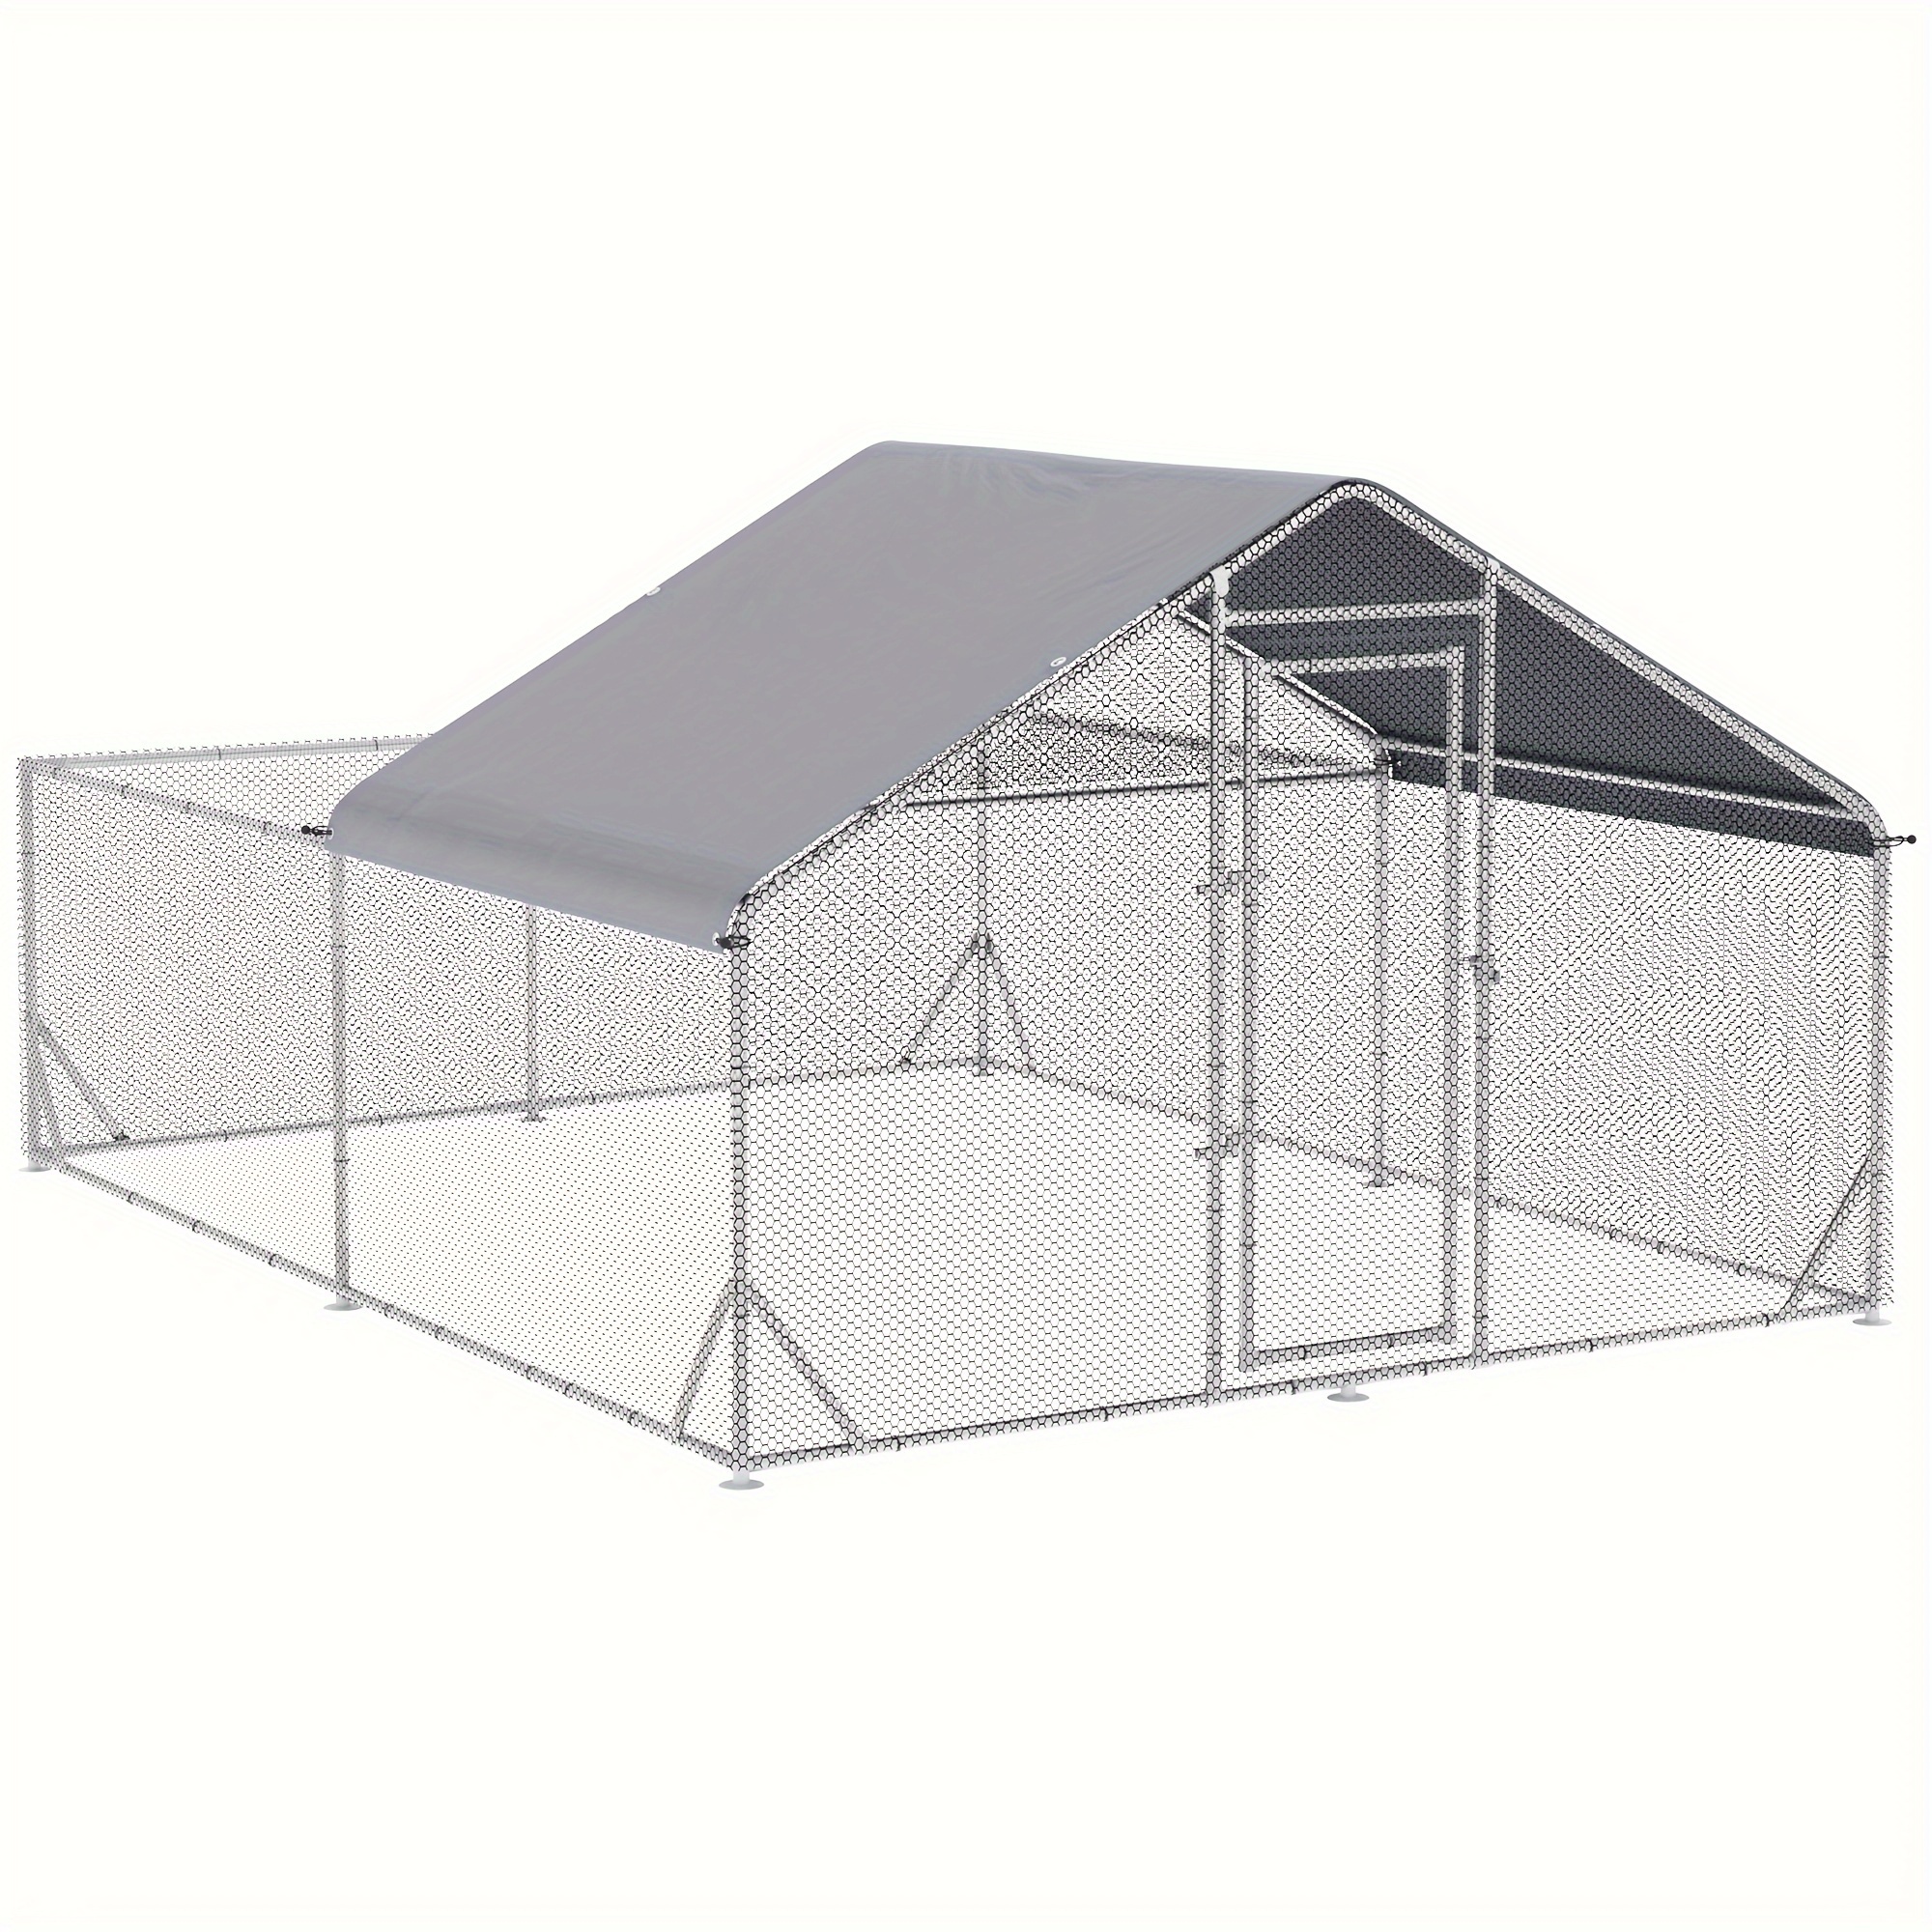 

Pawhut Large Chicken Coop Metal For Chickens With Waterproof And Anti-uv Cover, Spire Shaped Walk In Fence Cage Hen House For Outdoor And Yard Farm Use, 1" Dia, 9.8' X 13.1' X 6.4'